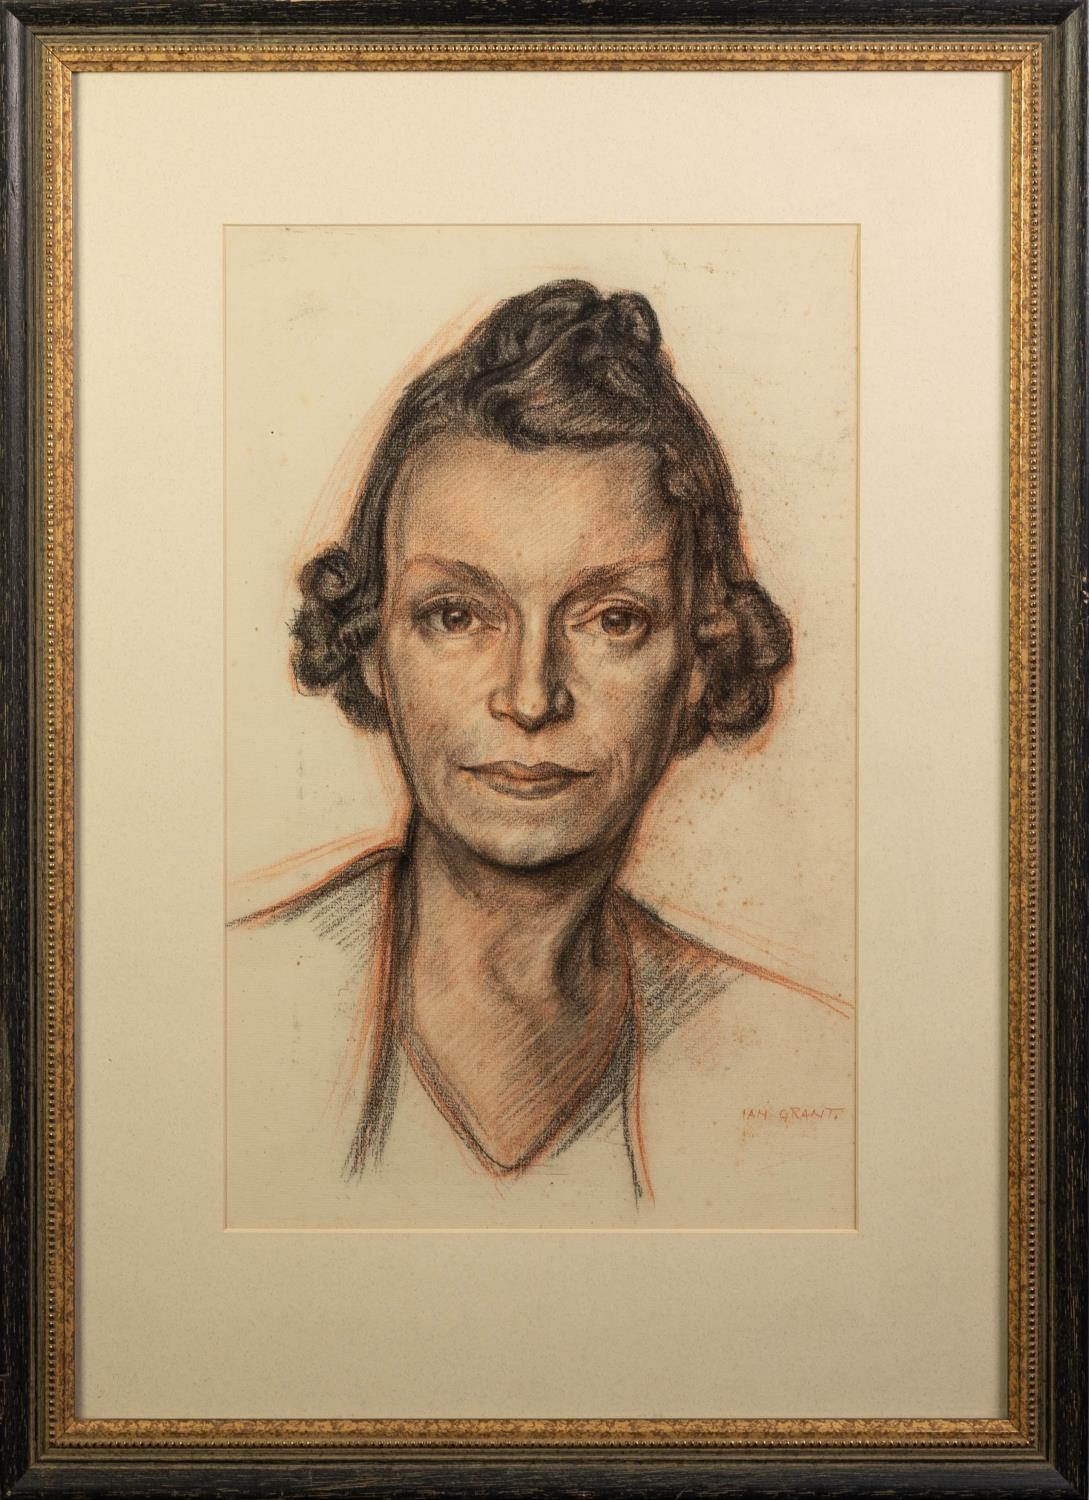 IAN GRANT (1904 - 1993) CONTE CRAYON DRAWING The Artist's Mother, bust portrait Signed lower right - Image 2 of 2